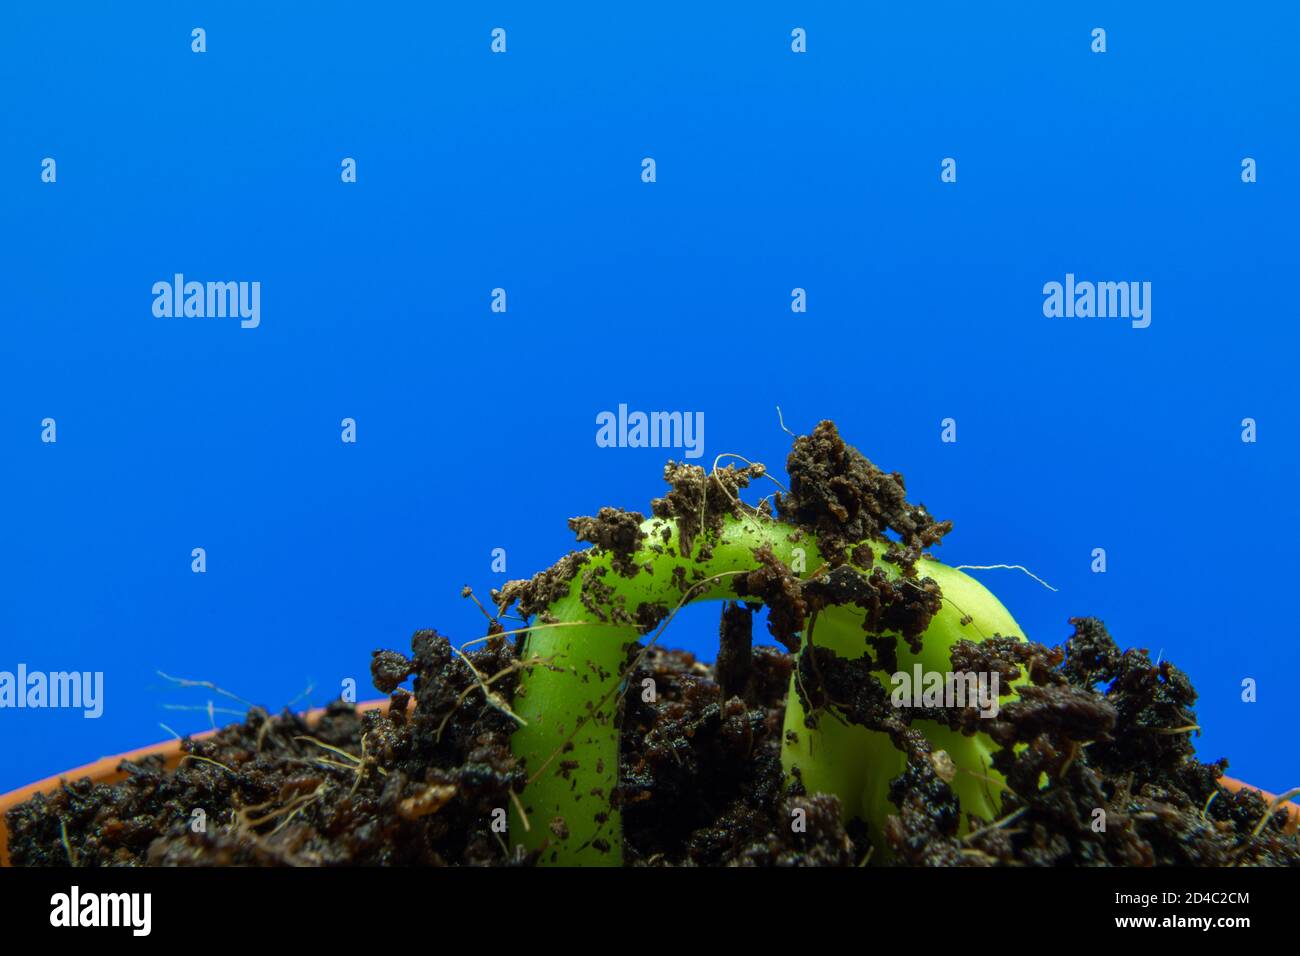 Young bean sprout comes out of the soil. Growing out of soil with blue background Stock Photo